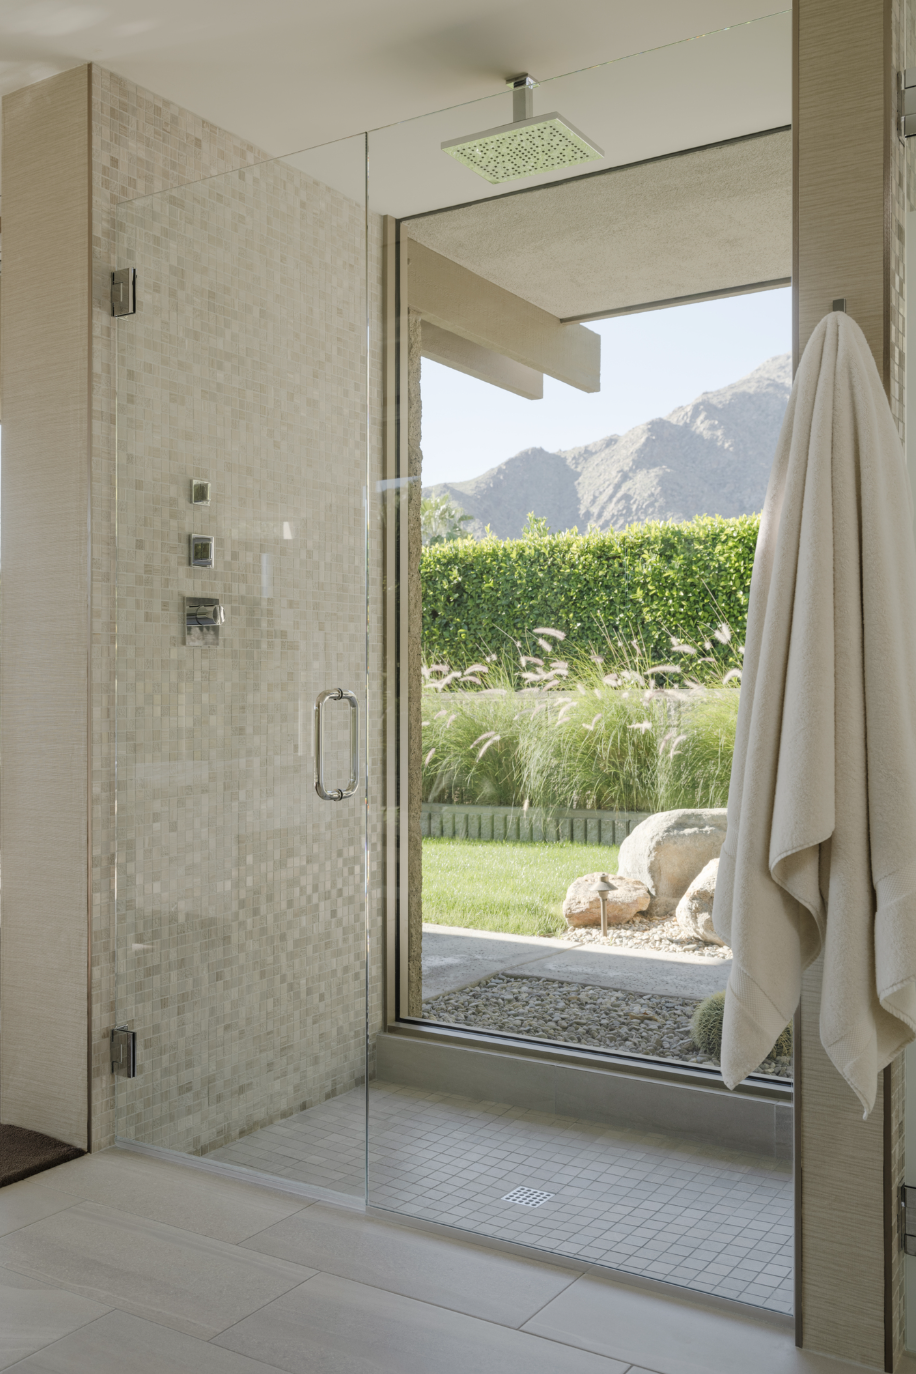 https://hips.hearstapps.com/hmg-prod/images/walk-in-shower-ideas-stunning-views-6439c1267c6a7.png?crop=0.9087301587301587xw:1xh;center,top&resize=980:*